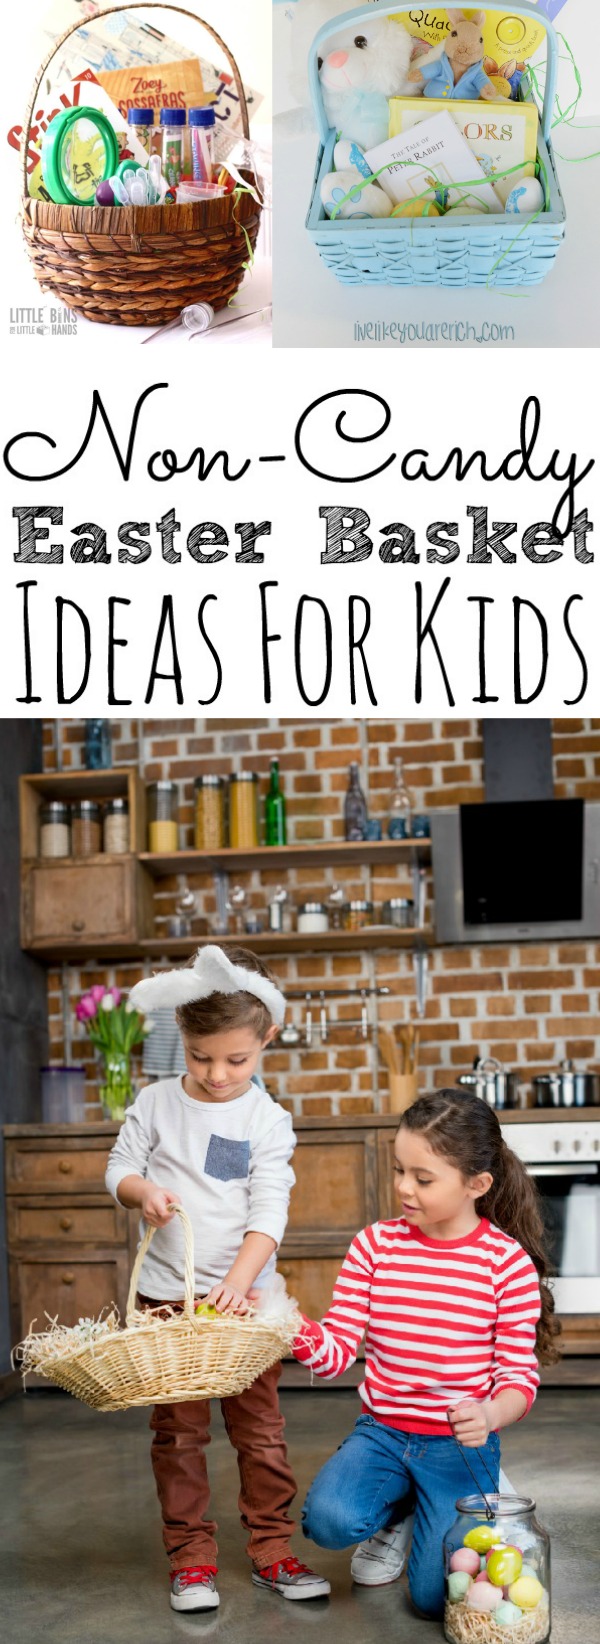 Fun Ideas For Kids Easter Basket Without Candy